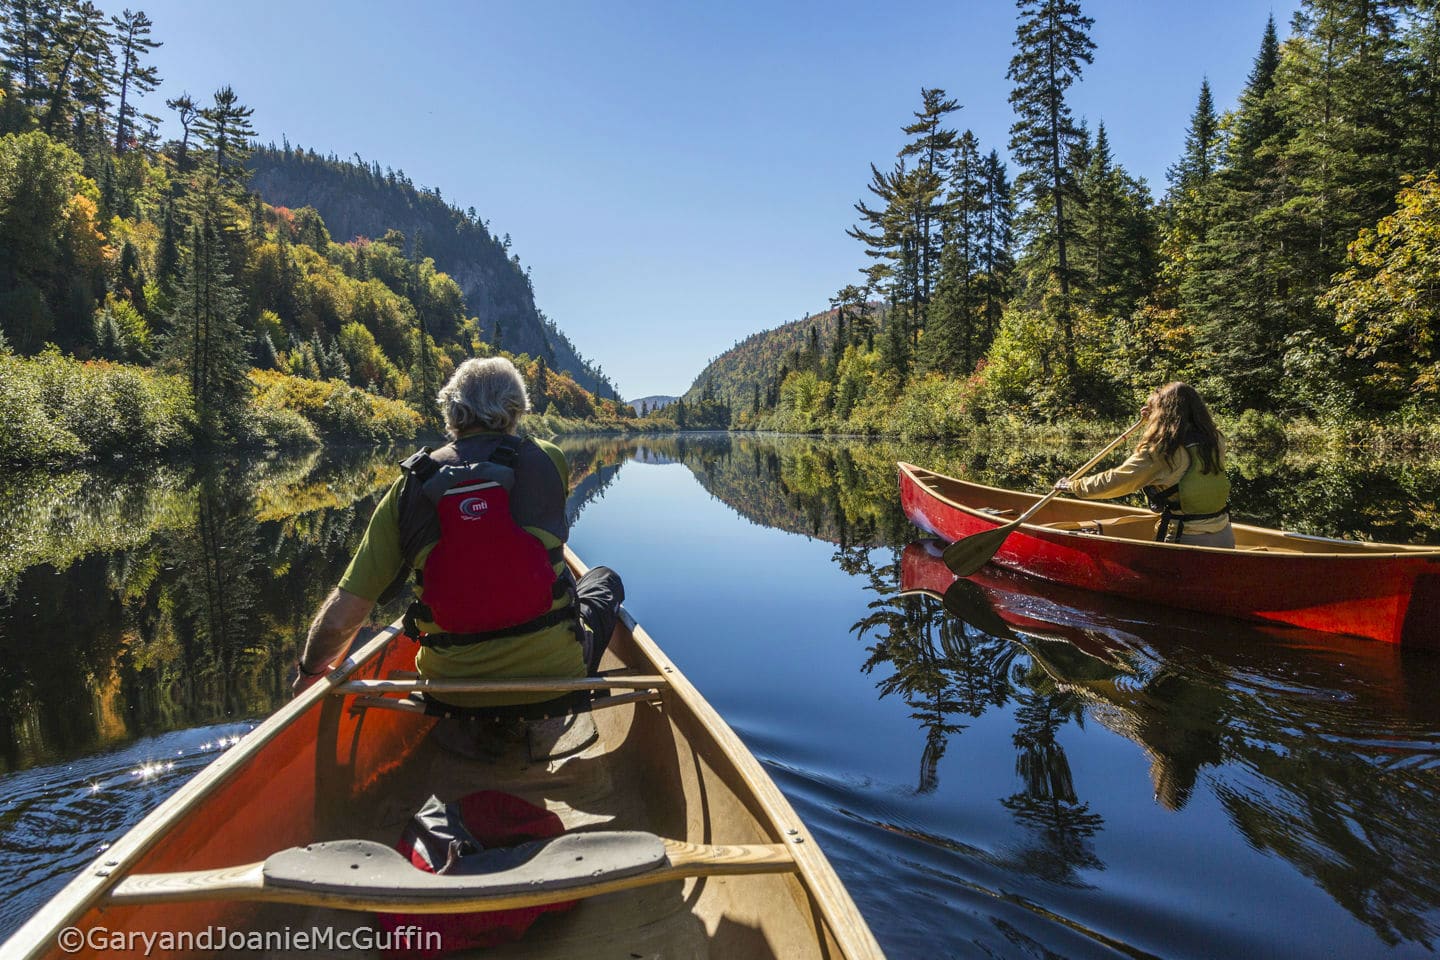 Two people canoeing on calm river in Northern Ontario